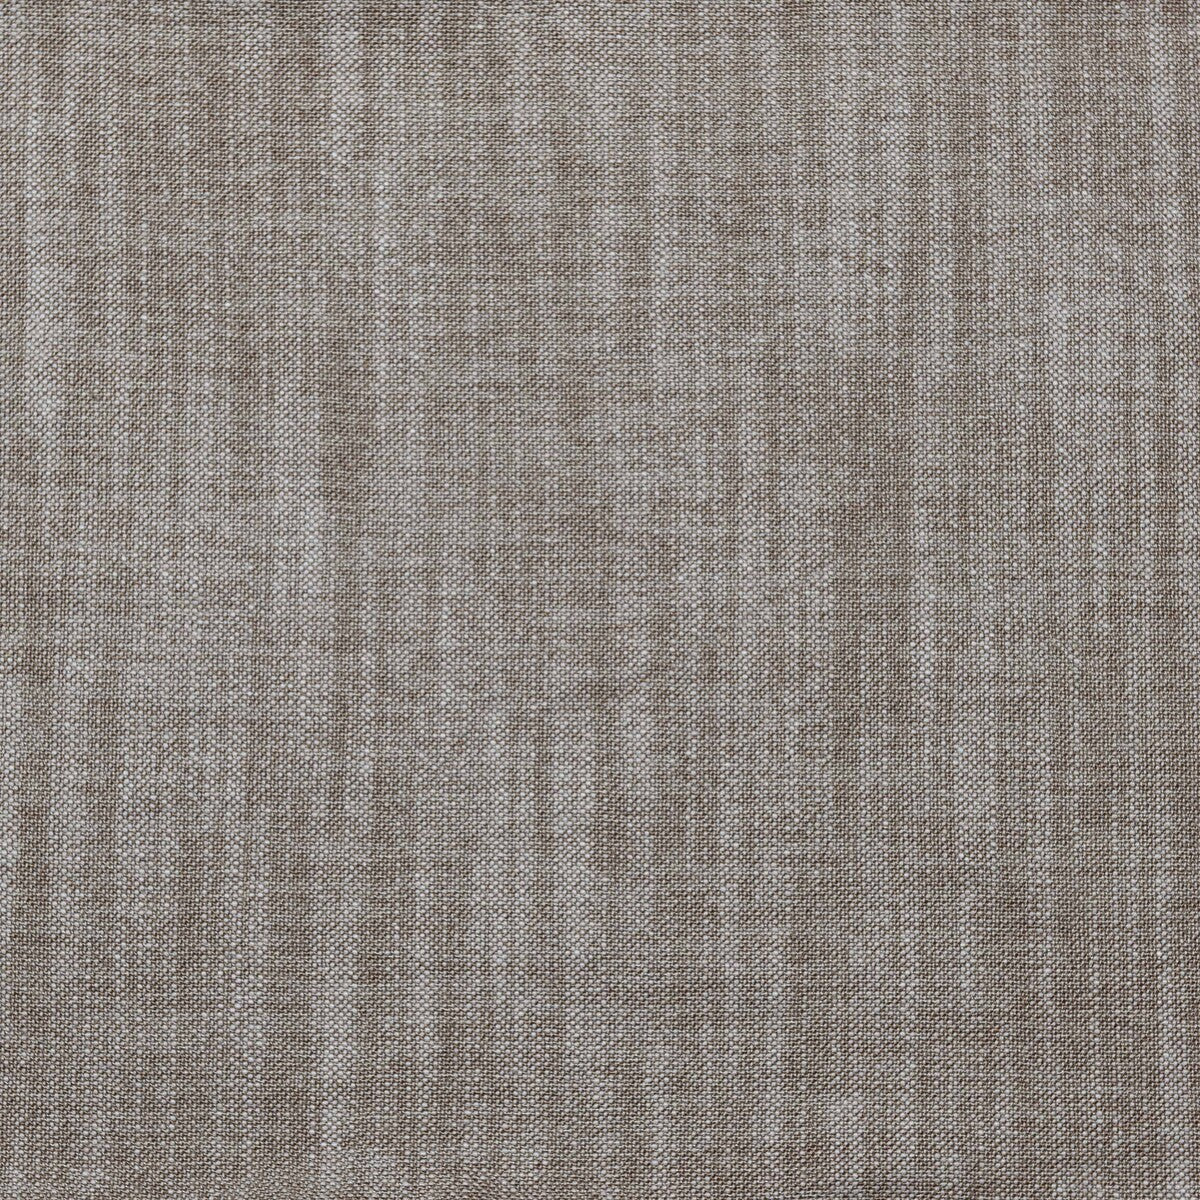 Uganda fabric in tostado color - pattern GDT5389.5.0 - by Gaston y Daniela in the Gaston Africalia collection